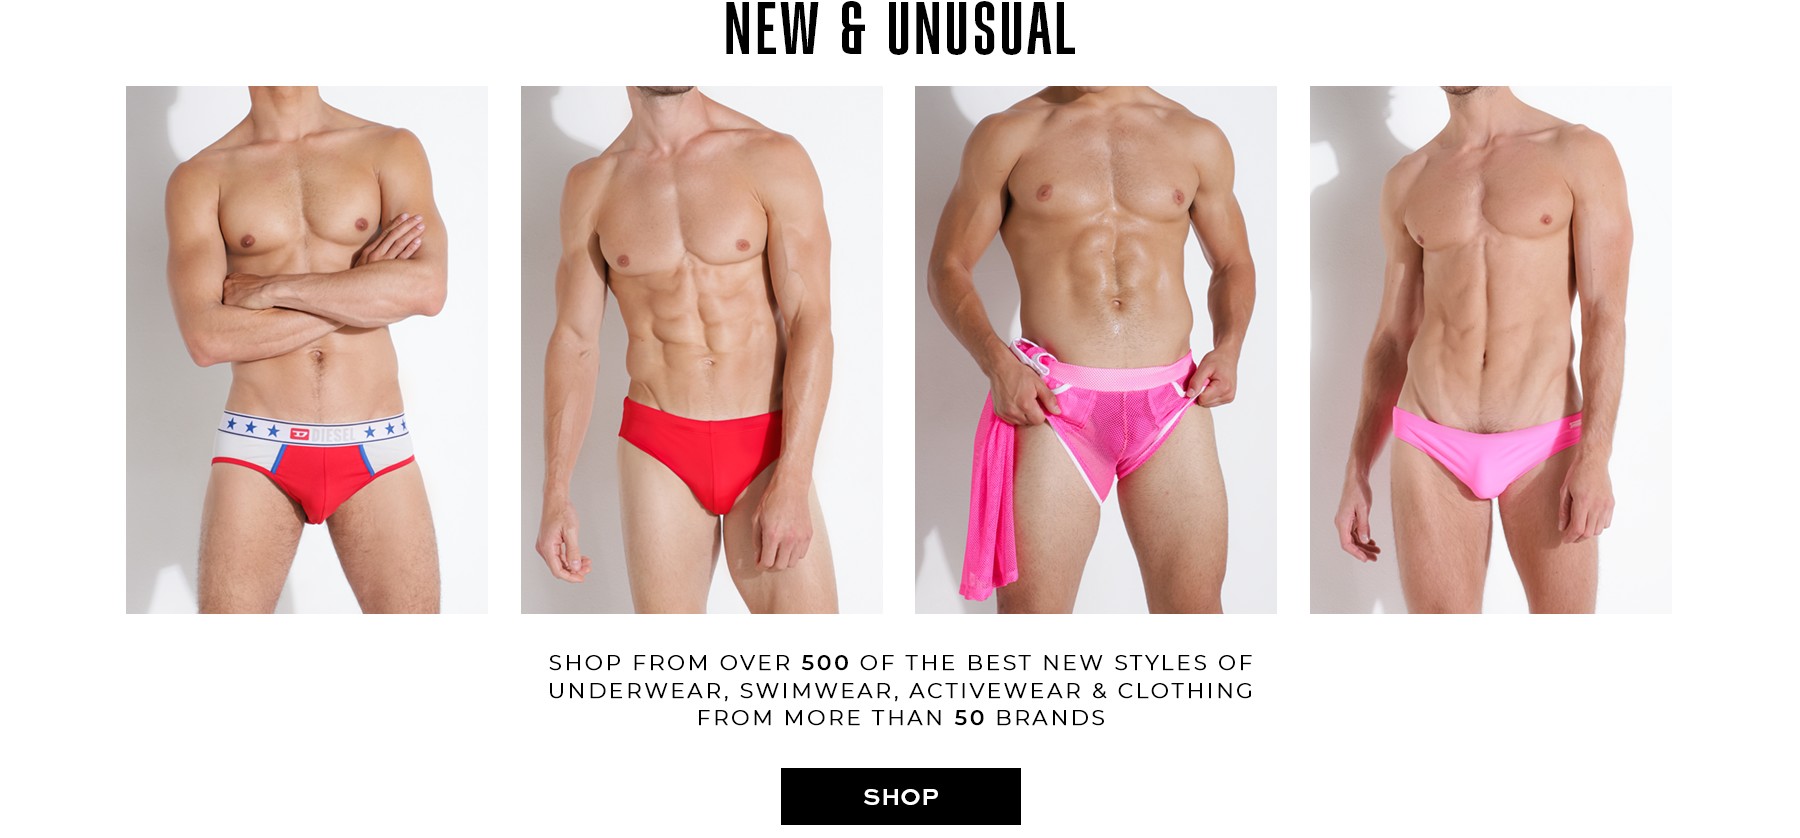 New and unusual underwear, swimwear and clothing